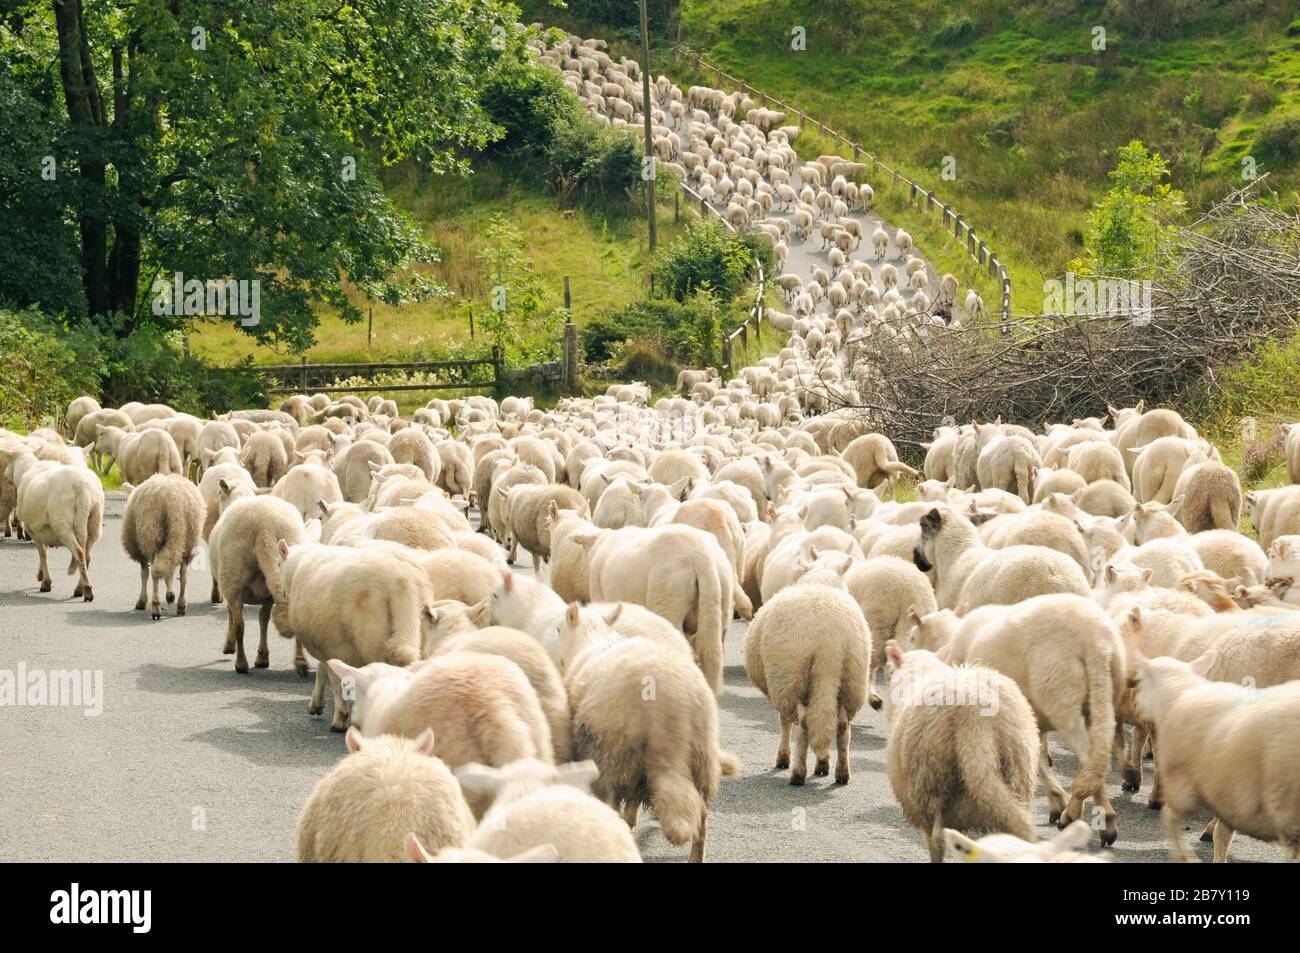 A Brecon Beacons road towards the Llia Valley absolutely filled with sheep in the Fforest Fawr section of the Brecon Beacons National Park in Wales Stock Photo